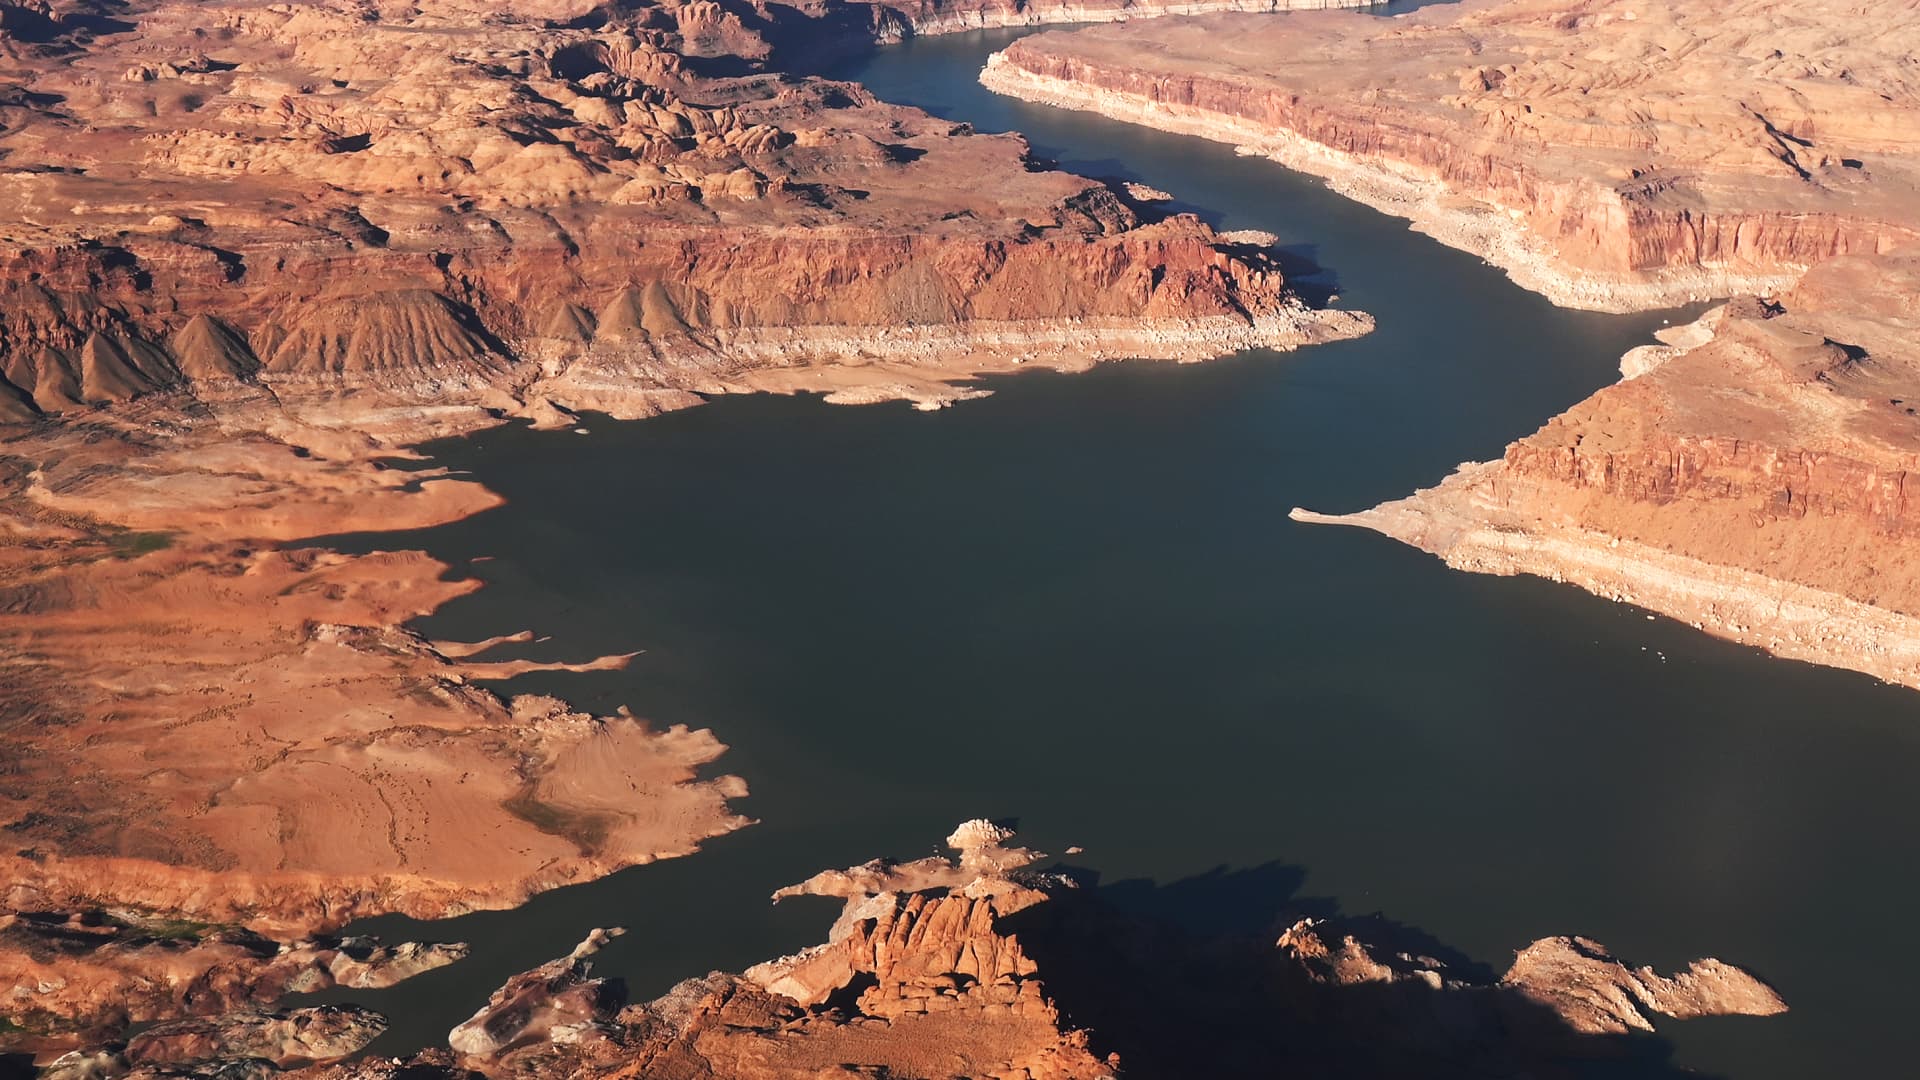 Water is so low in the Colorado River feds are holding some back so one dam can keep generating power – CNBC